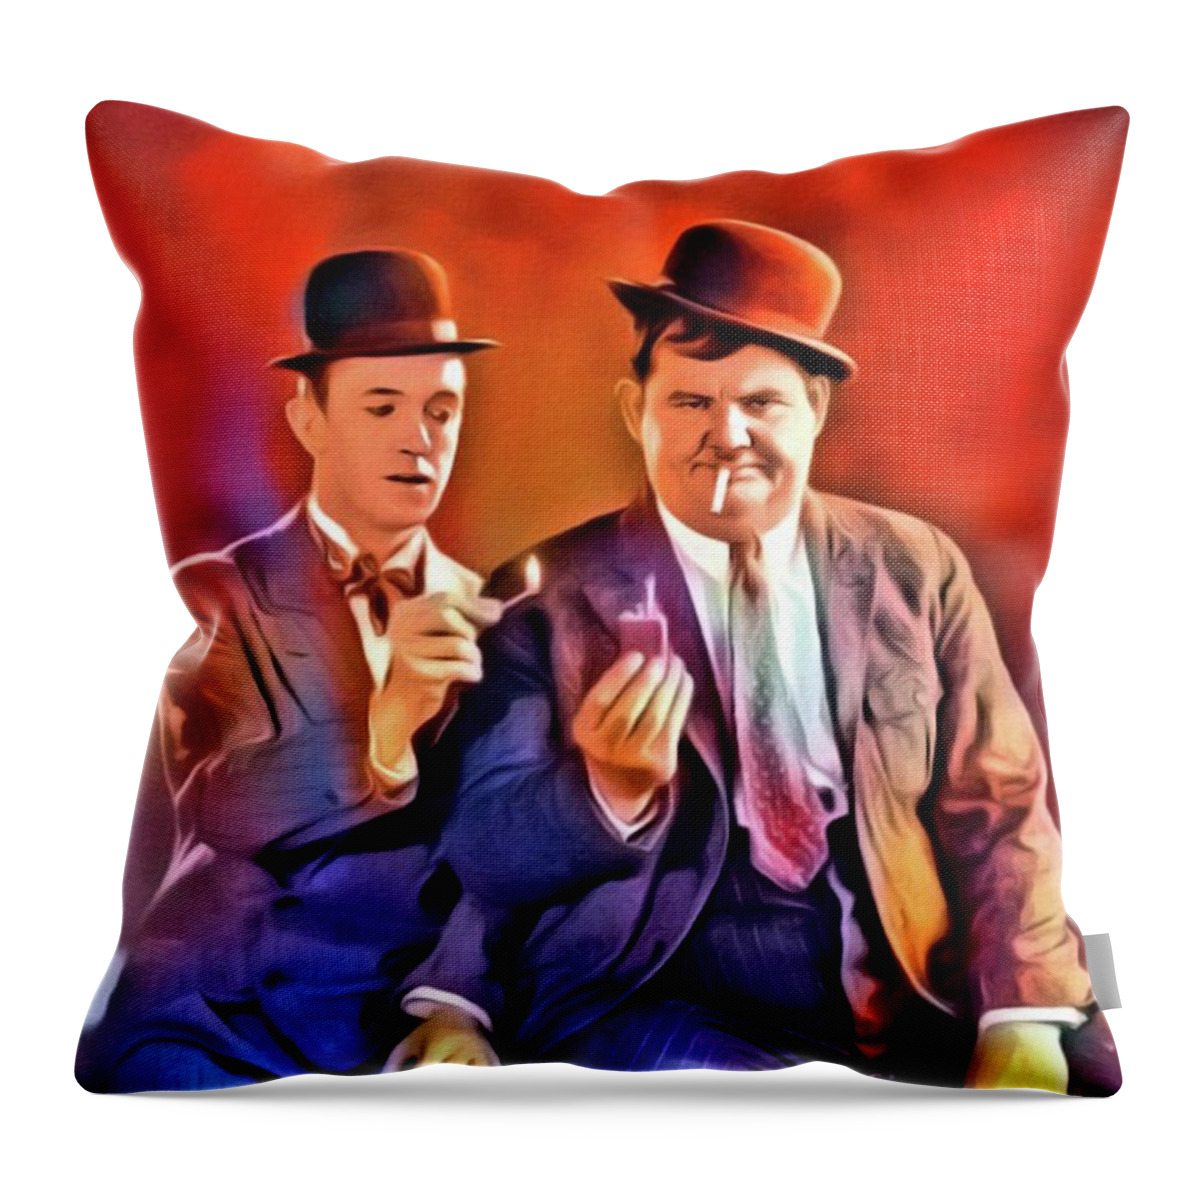 Hollywood Throw Pillow featuring the digital art Laurel and Hardy, Vintage Comedians. Digital Art by MB by Esoterica Art Agency